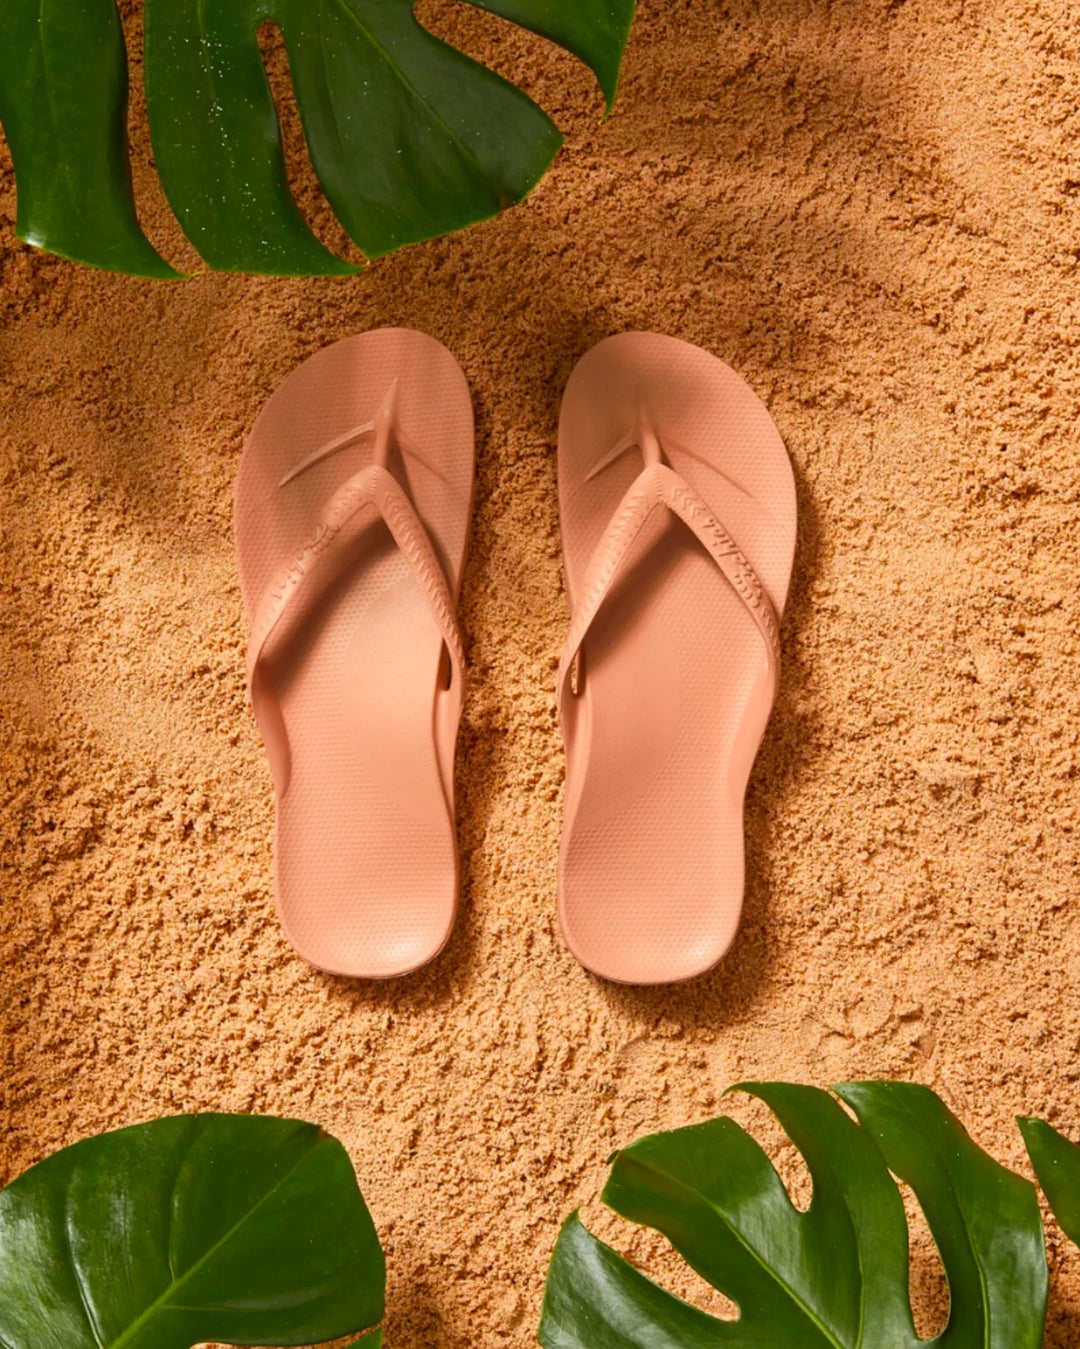 https://cdn.shopify.com/s/files/1/1910/1787/products/Archies_Thongs_-Tan-_Arch_Support_Sandals.webp?v=1677617586&width=1080